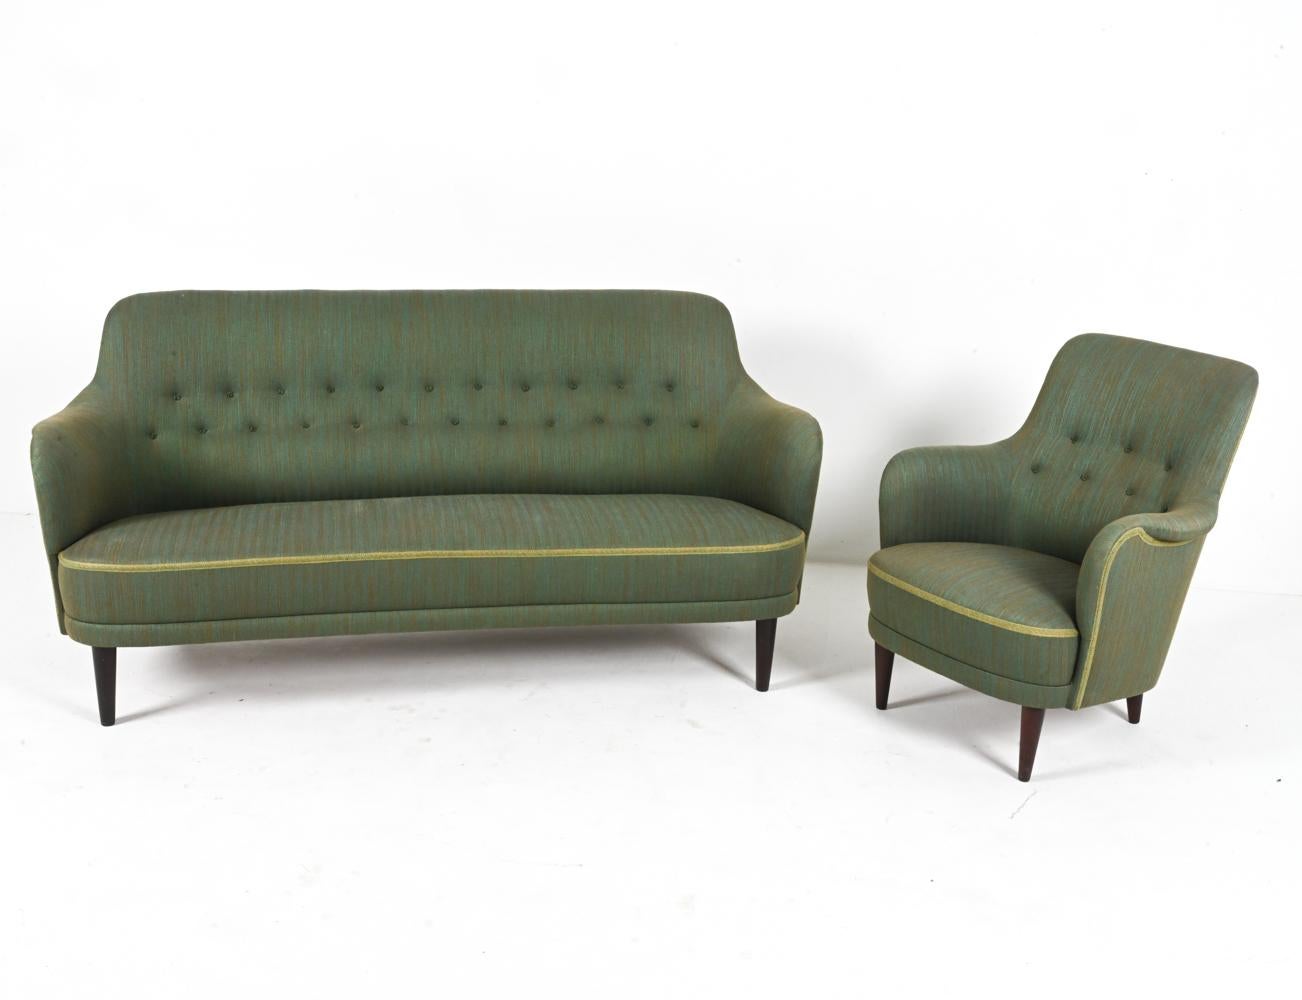 A classic Mid-Century living room set by the legendary Swedish furniture designer Carl Malmsten, featuring mahogany-stained beech wood legs and green twill upholstery. 

NOTE: Dimensions provided refer to the sofa. The chair measures H 33.5